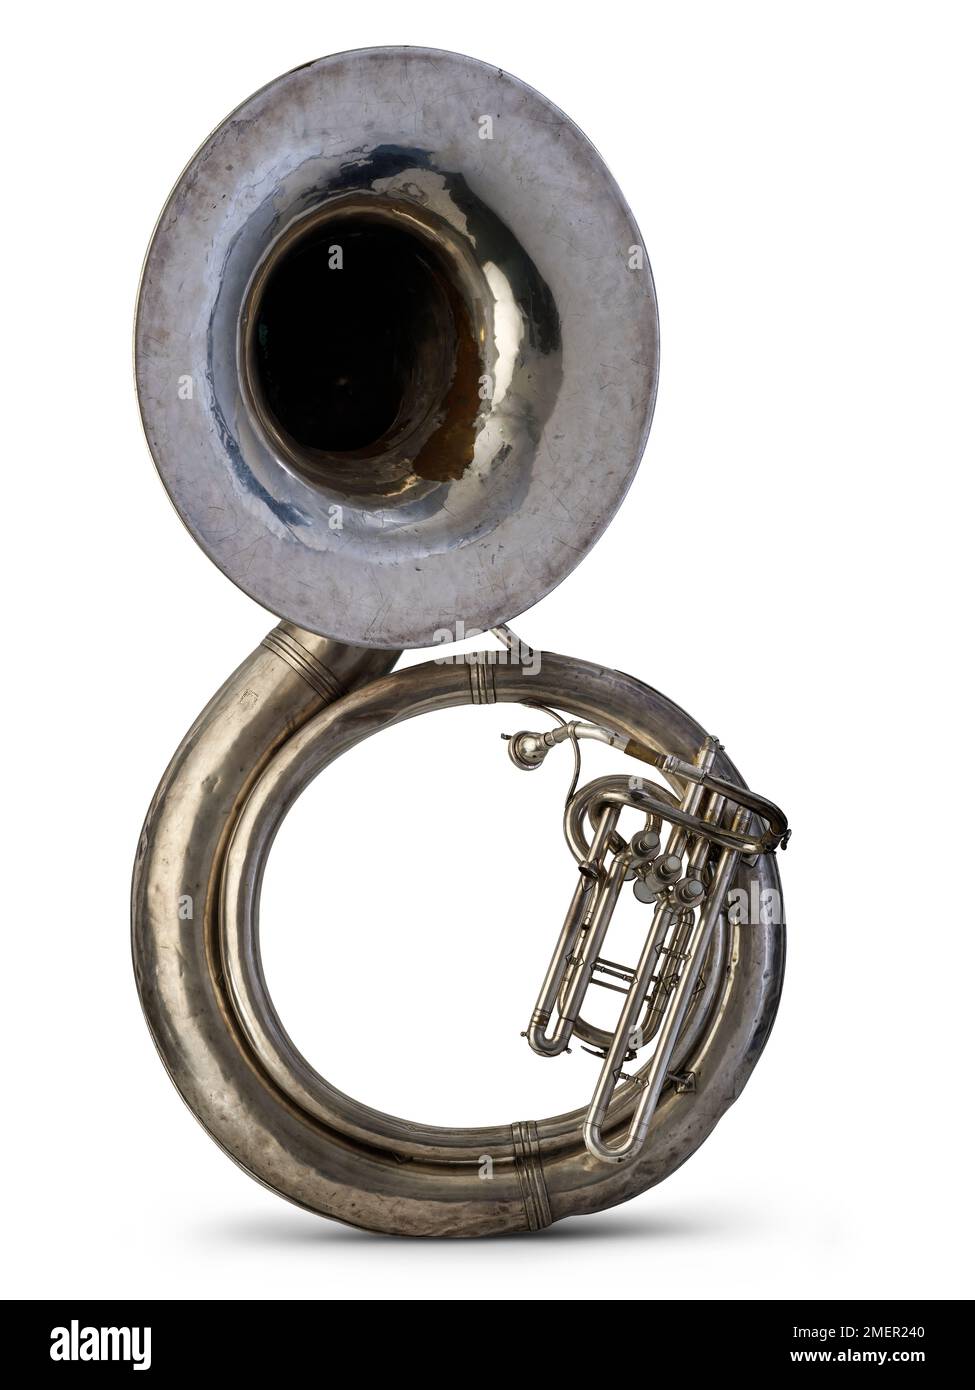 Sousaphone, made by Adolph Schmidt, early 20th century Stock Photo